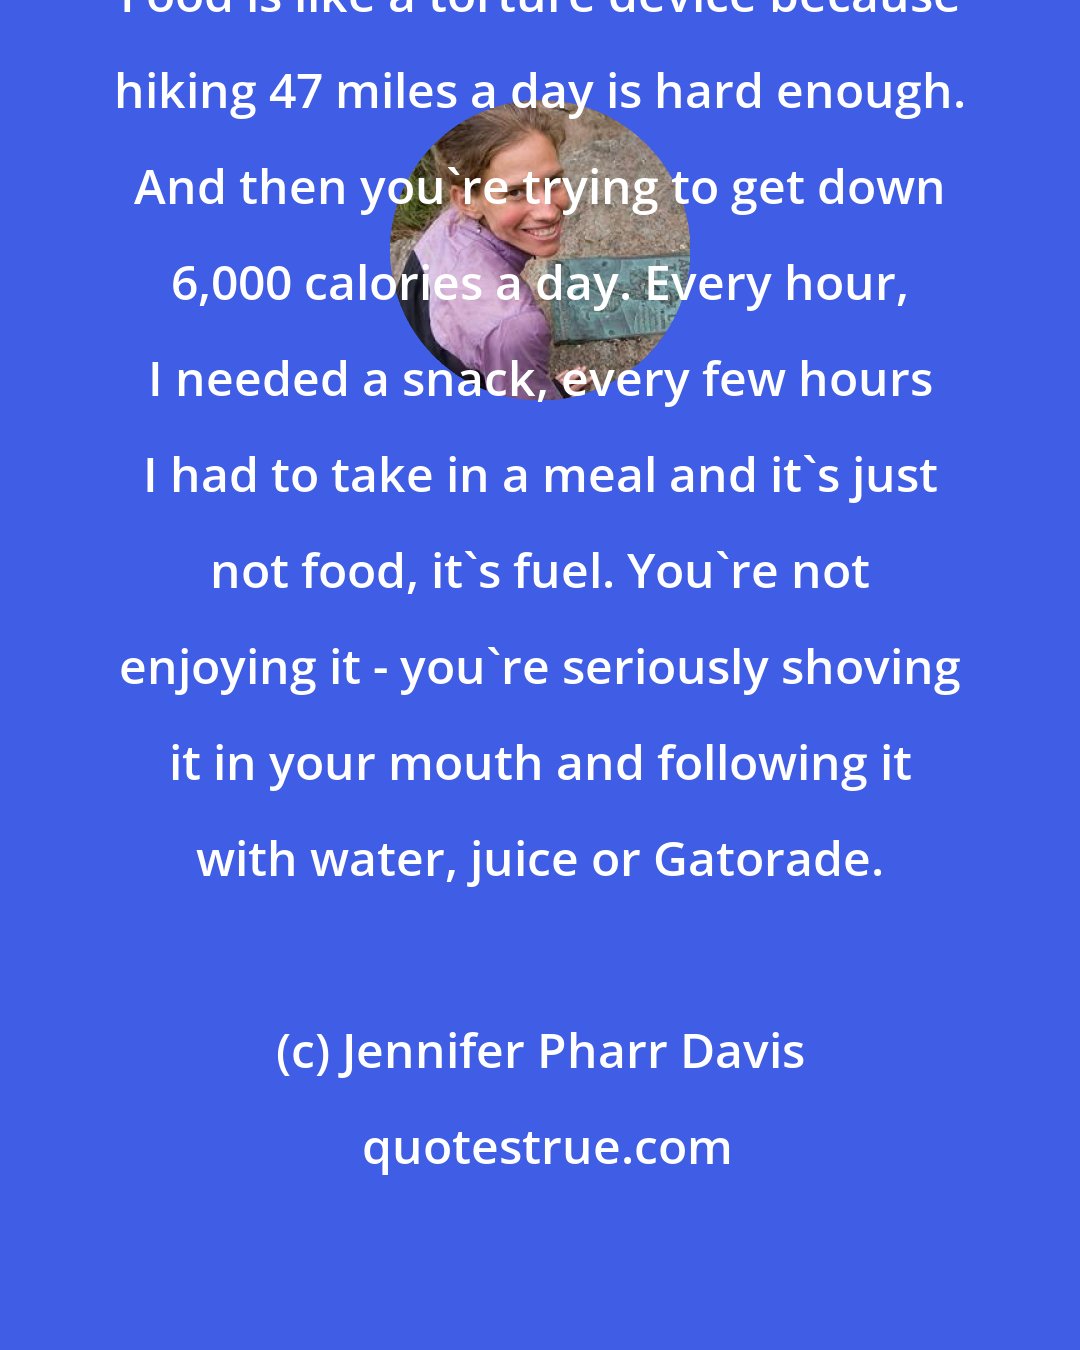 Jennifer Pharr Davis: Food is like a torture device because hiking 47 miles a day is hard enough. And then you're trying to get down 6,000 calories a day. Every hour, I needed a snack, every few hours I had to take in a meal and it's just not food, it's fuel. You're not enjoying it - you're seriously shoving it in your mouth and following it with water, juice or Gatorade.